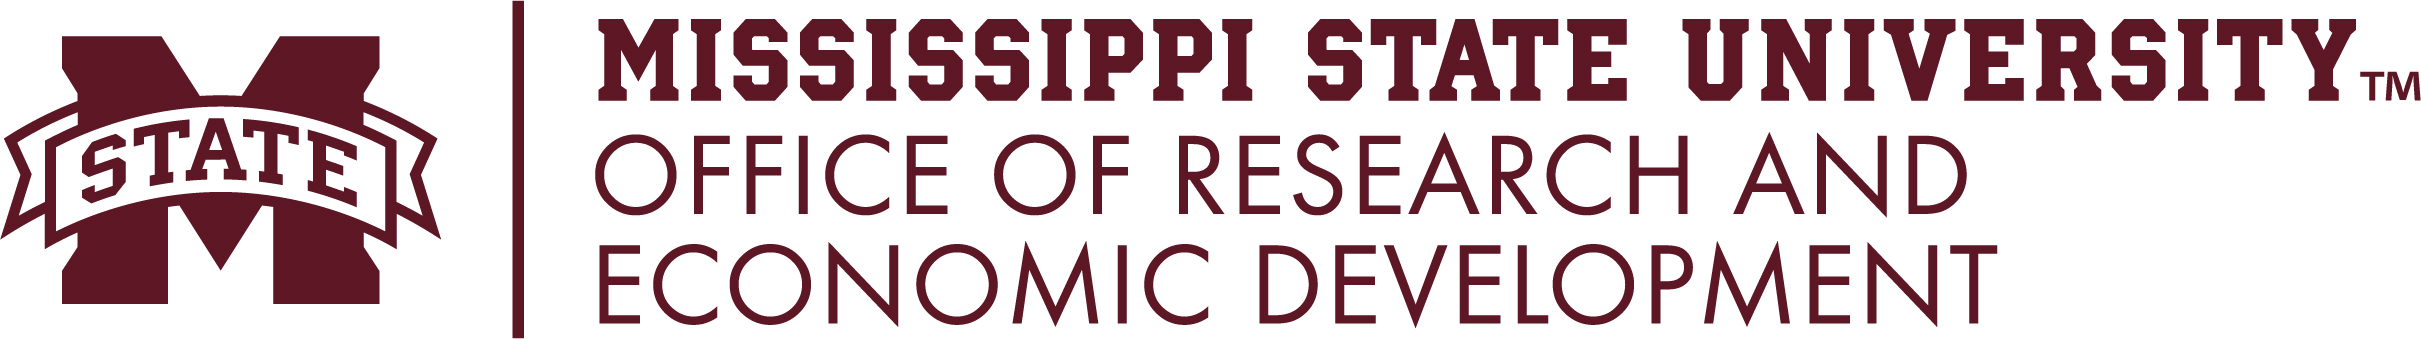 Mississippi State University Office of Research & Economic Development